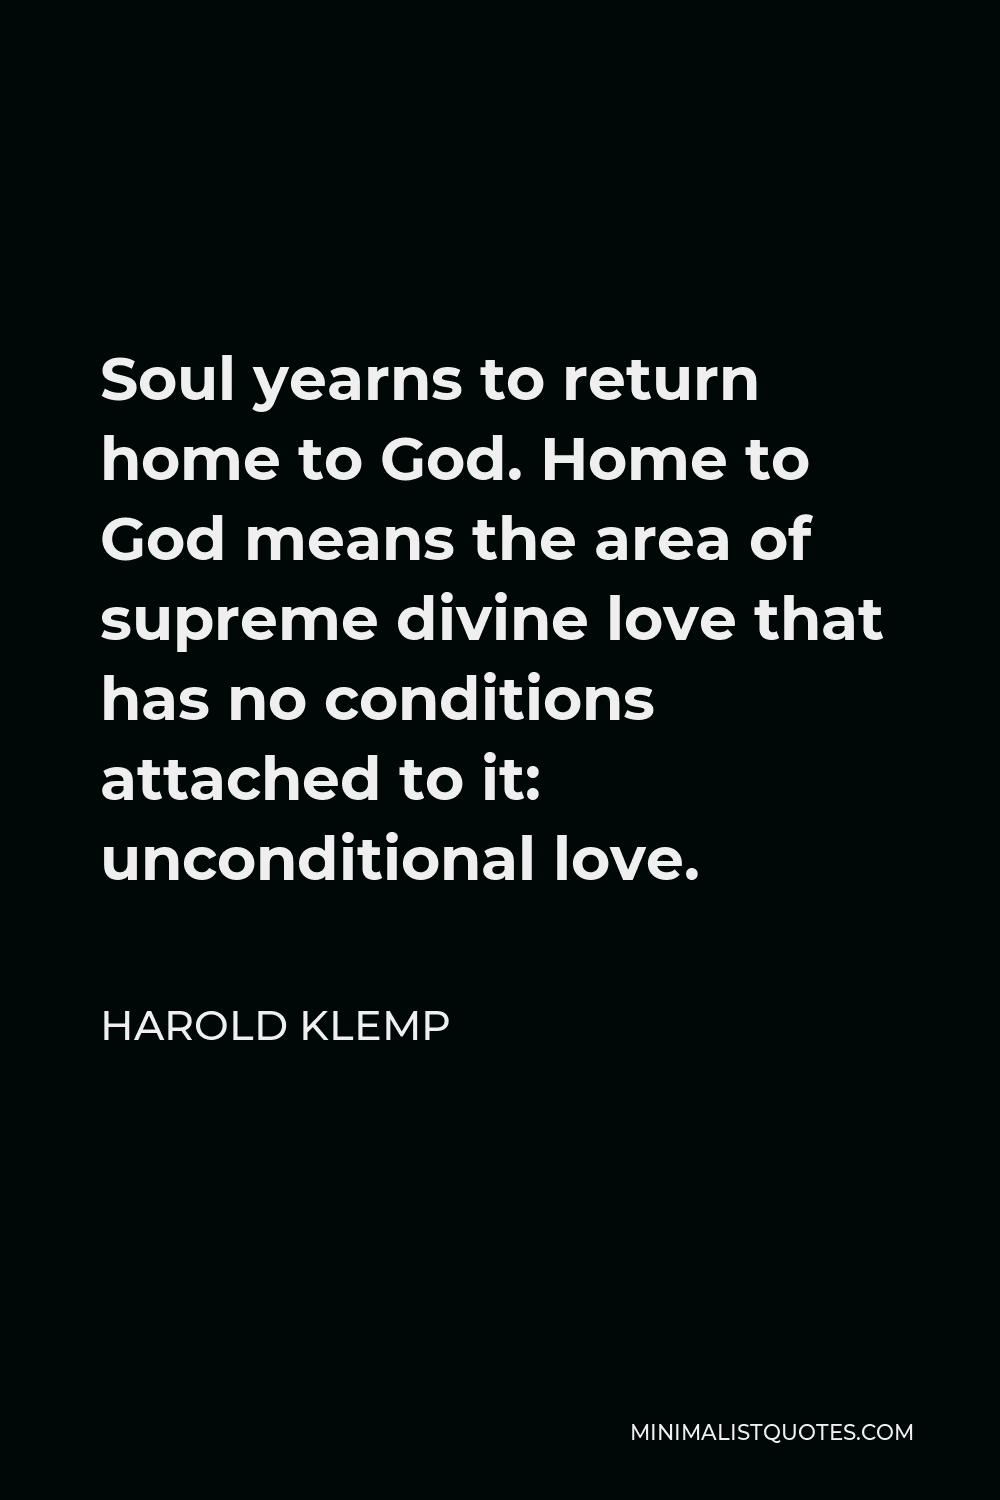 Harold Klemp Quote - Soul yearns to return home to God. Home to God means the area of supreme divine love that has no conditions attached to it: unconditional love.